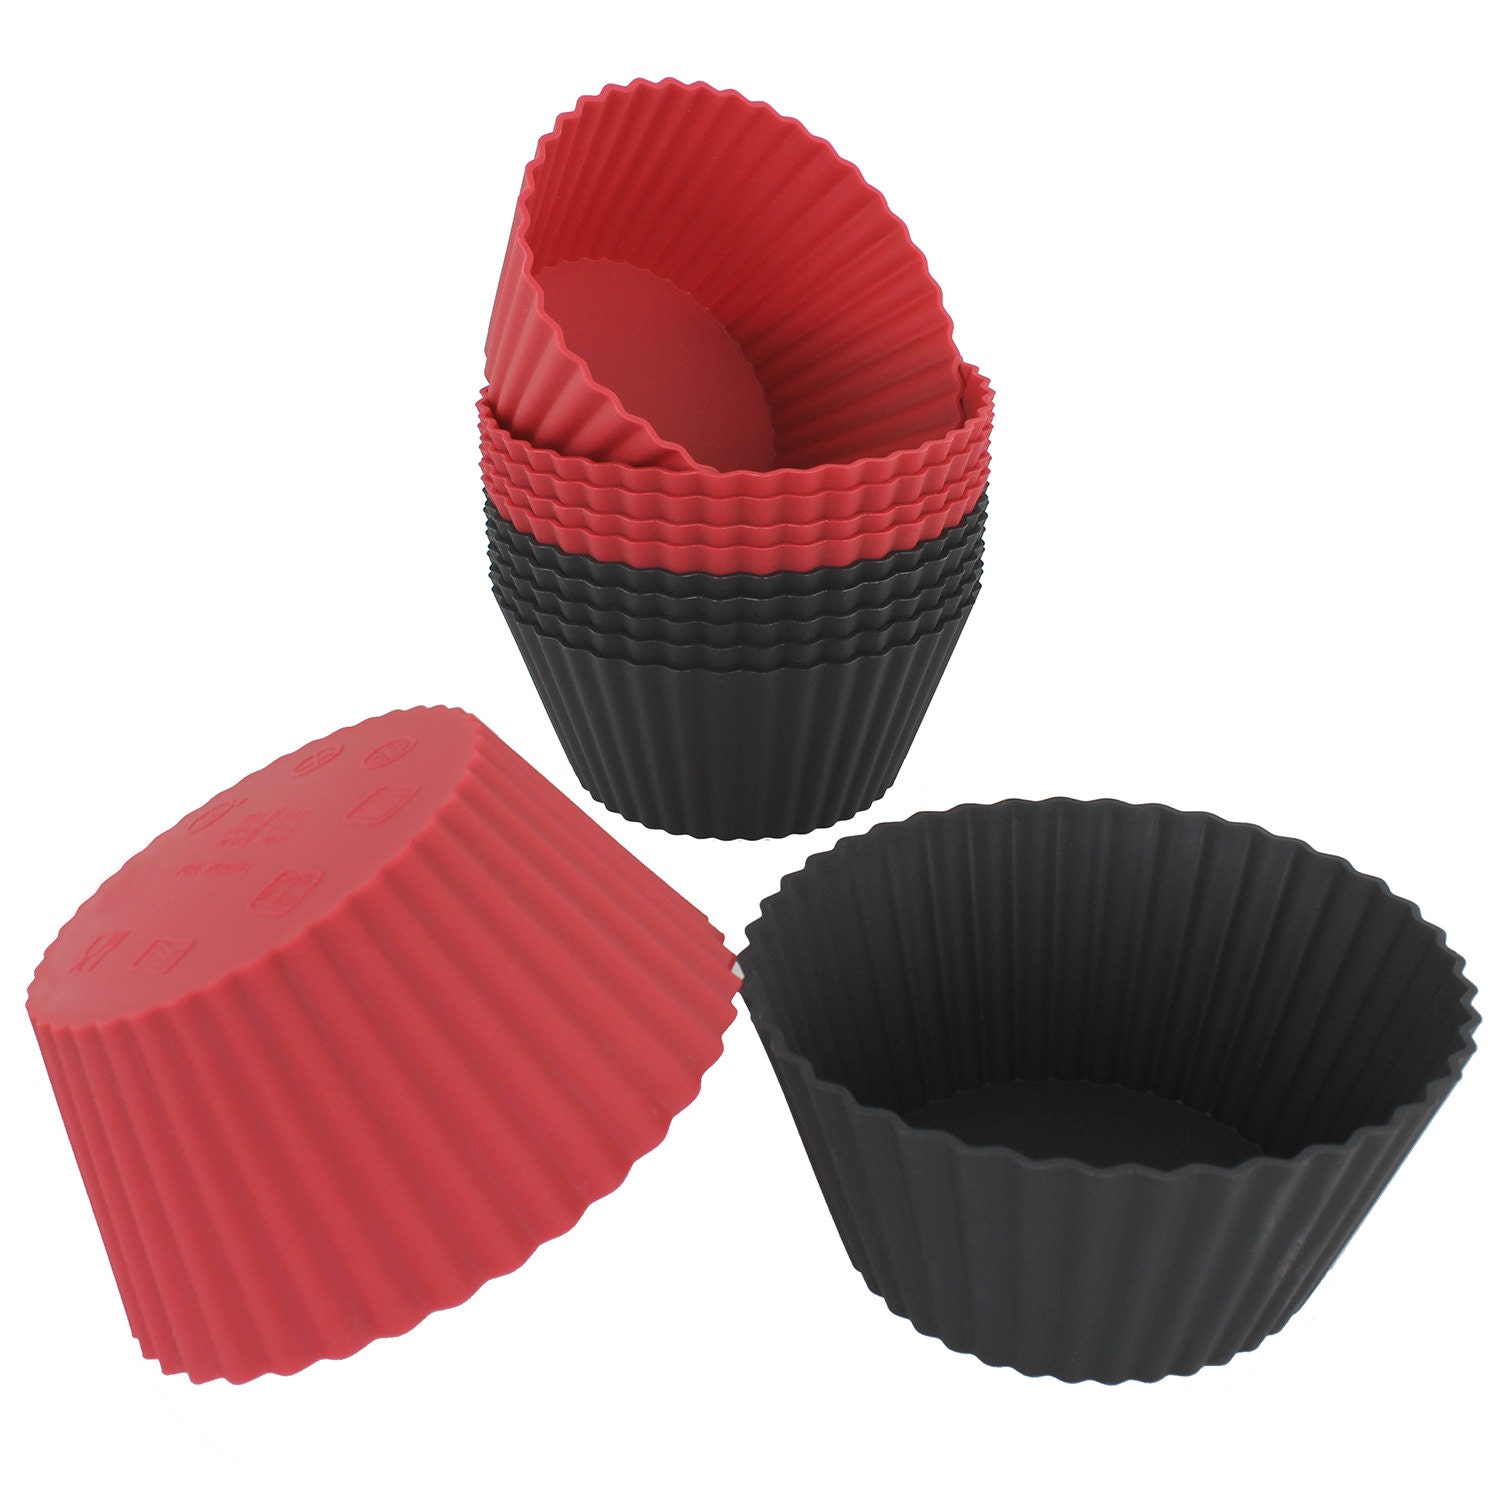 2 Pack Deep and Jumbo Muffin Tray,Round 7 Cup Silicone Cupcake